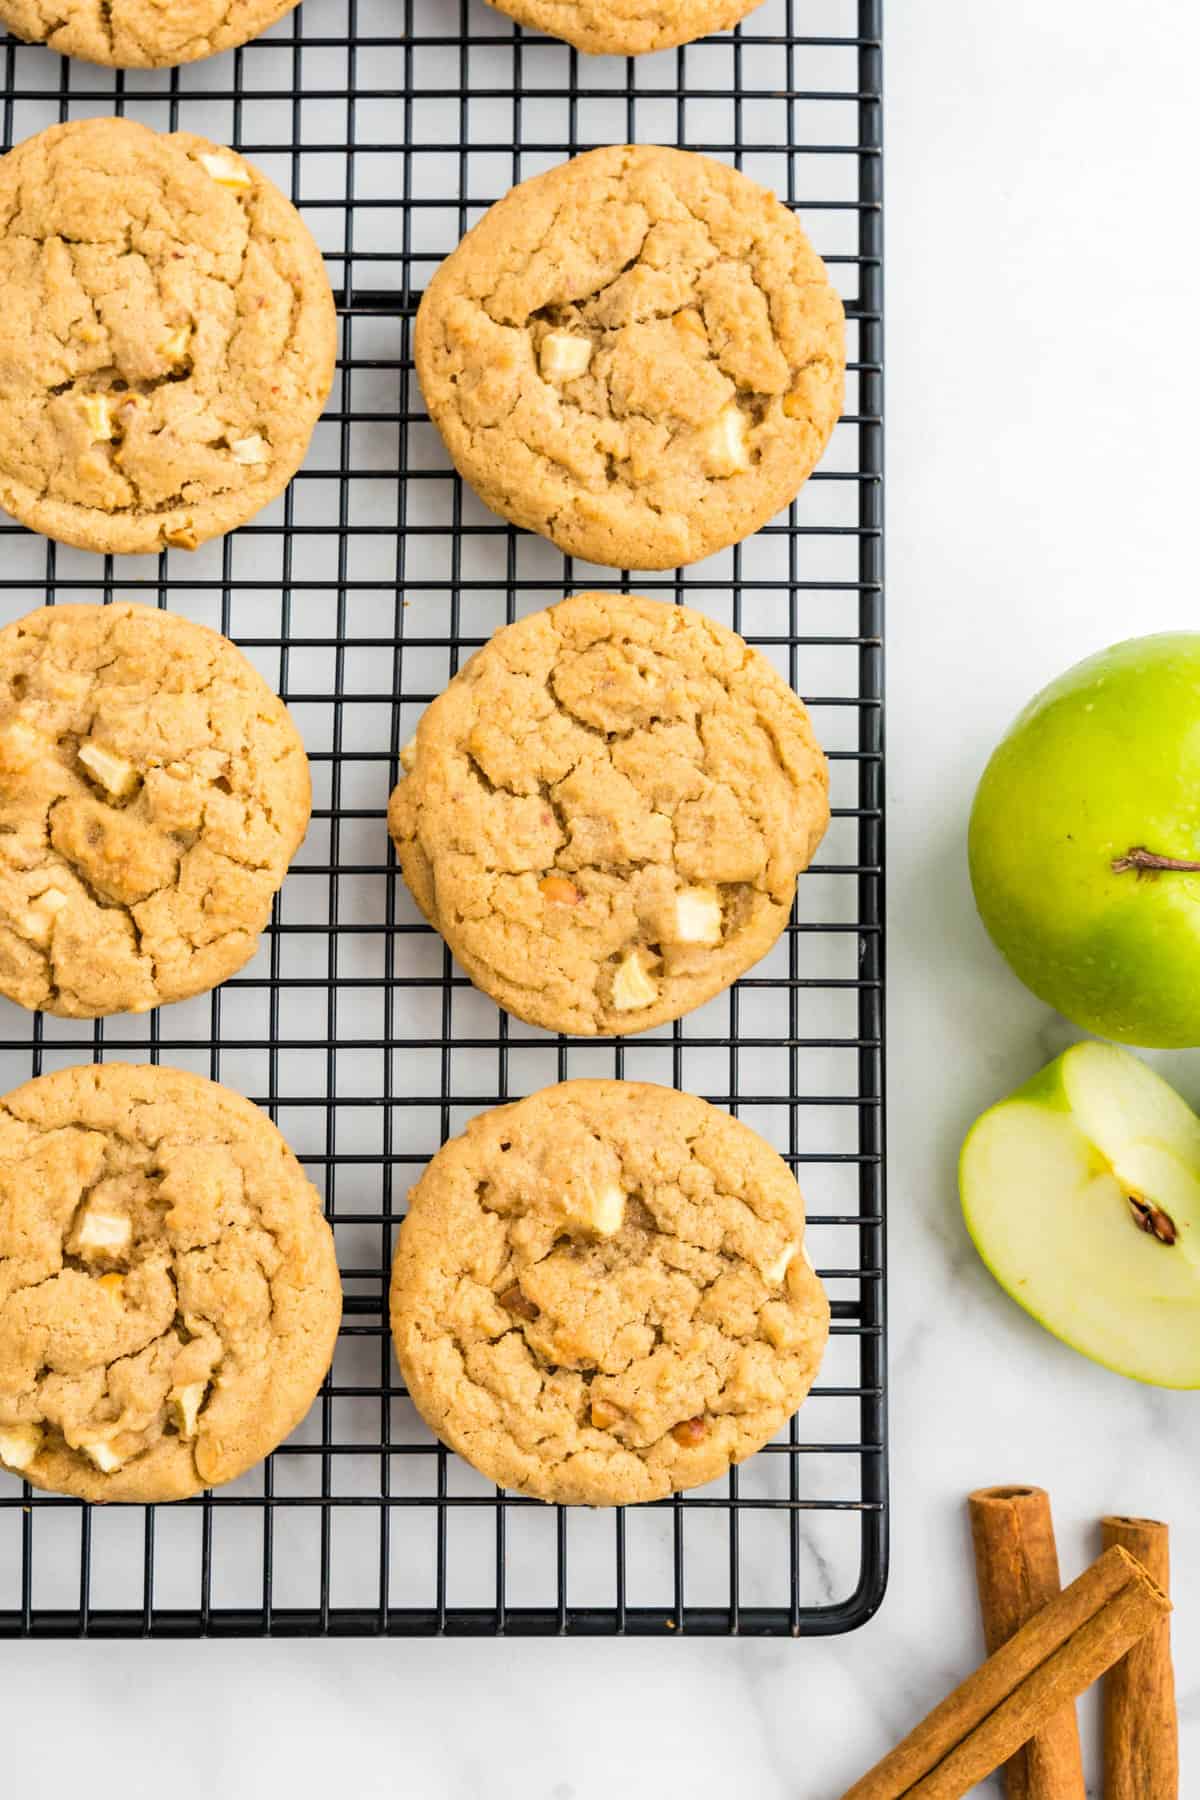 Allowing Peanut Butter Apple Cookies to cool on wire cooling rack